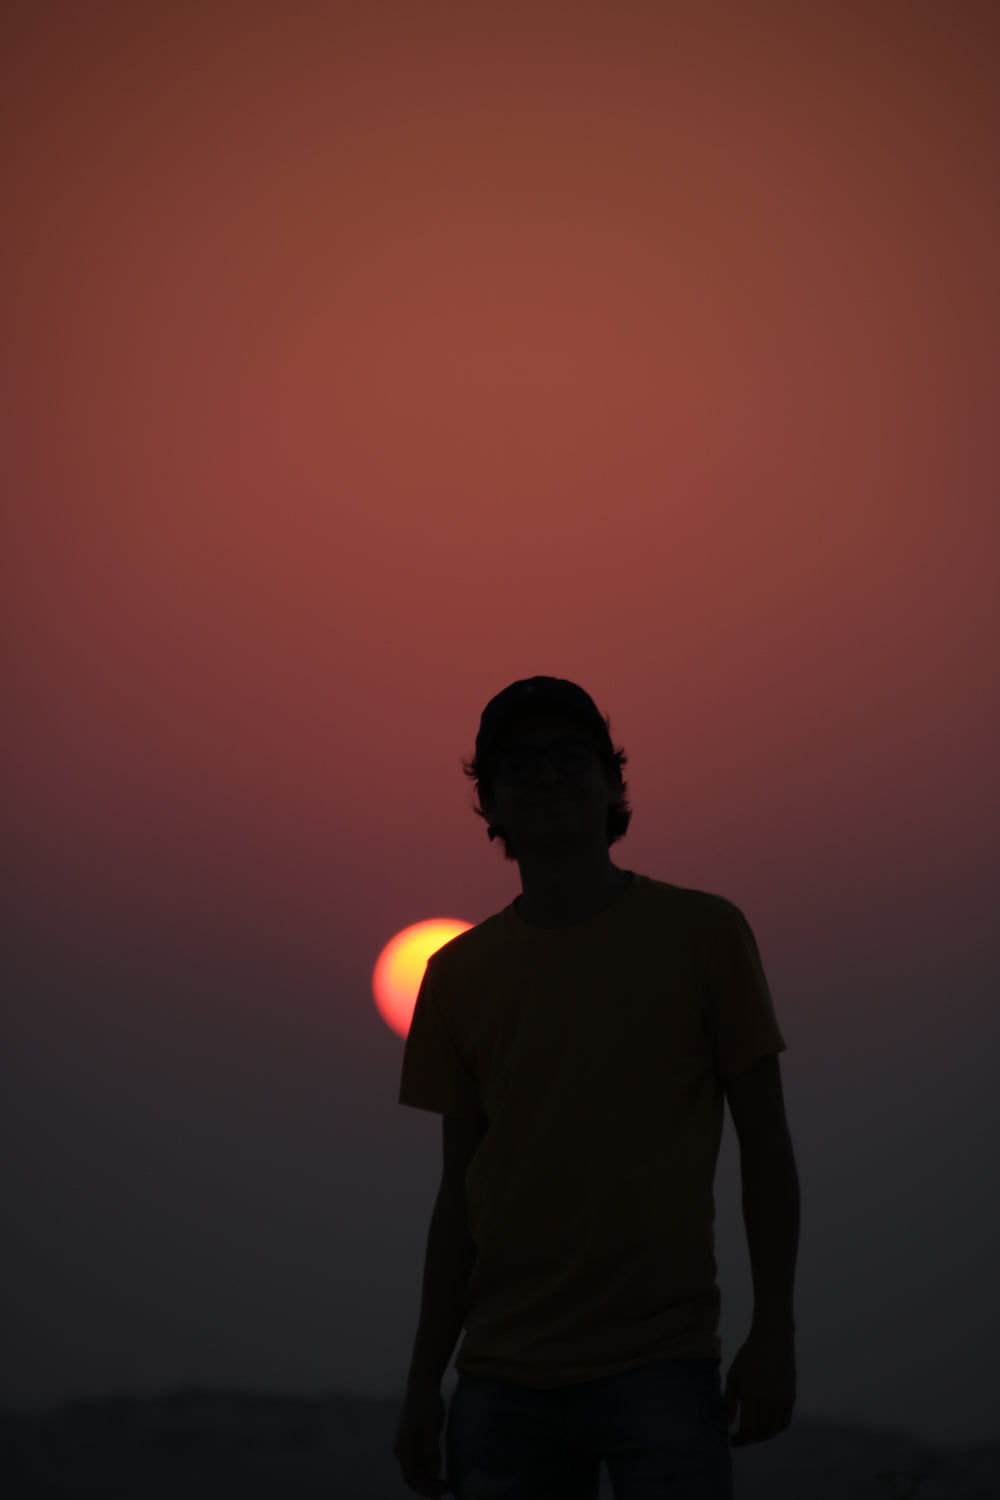 silhouette of a person with a baseball cap against a setting sun